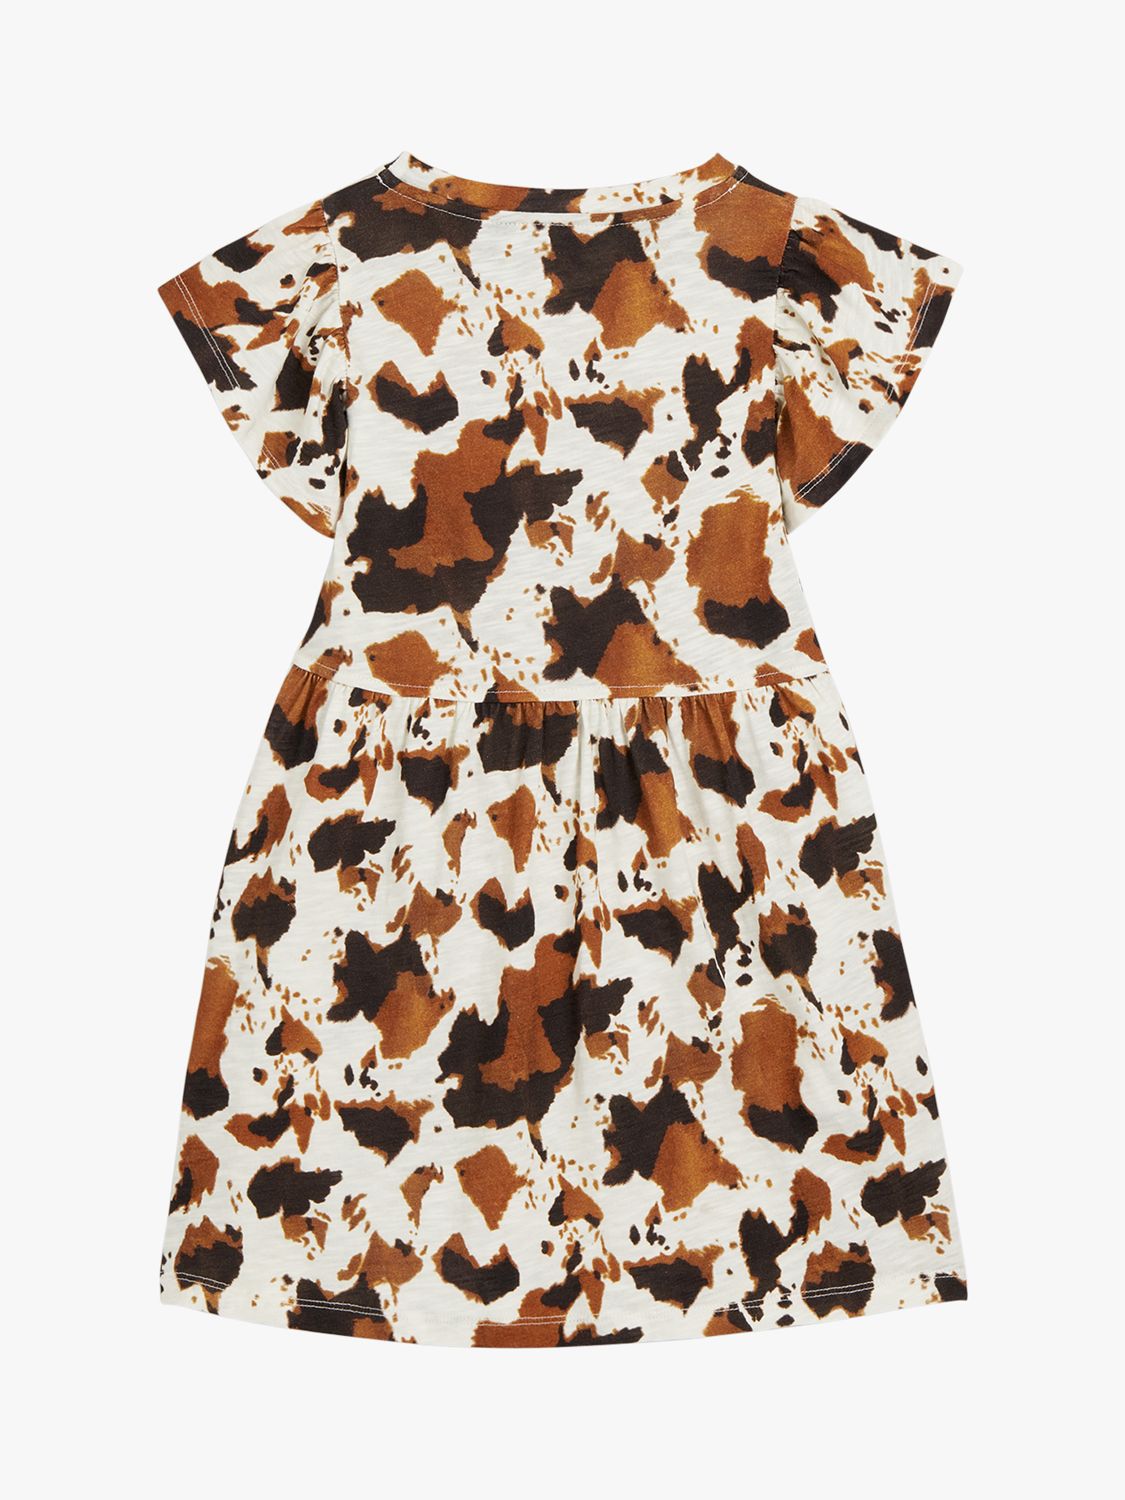 Buy Whistles Kids' Piper Cow Print Cotton Jersey Dress, Brown/Multi Online at johnlewis.com